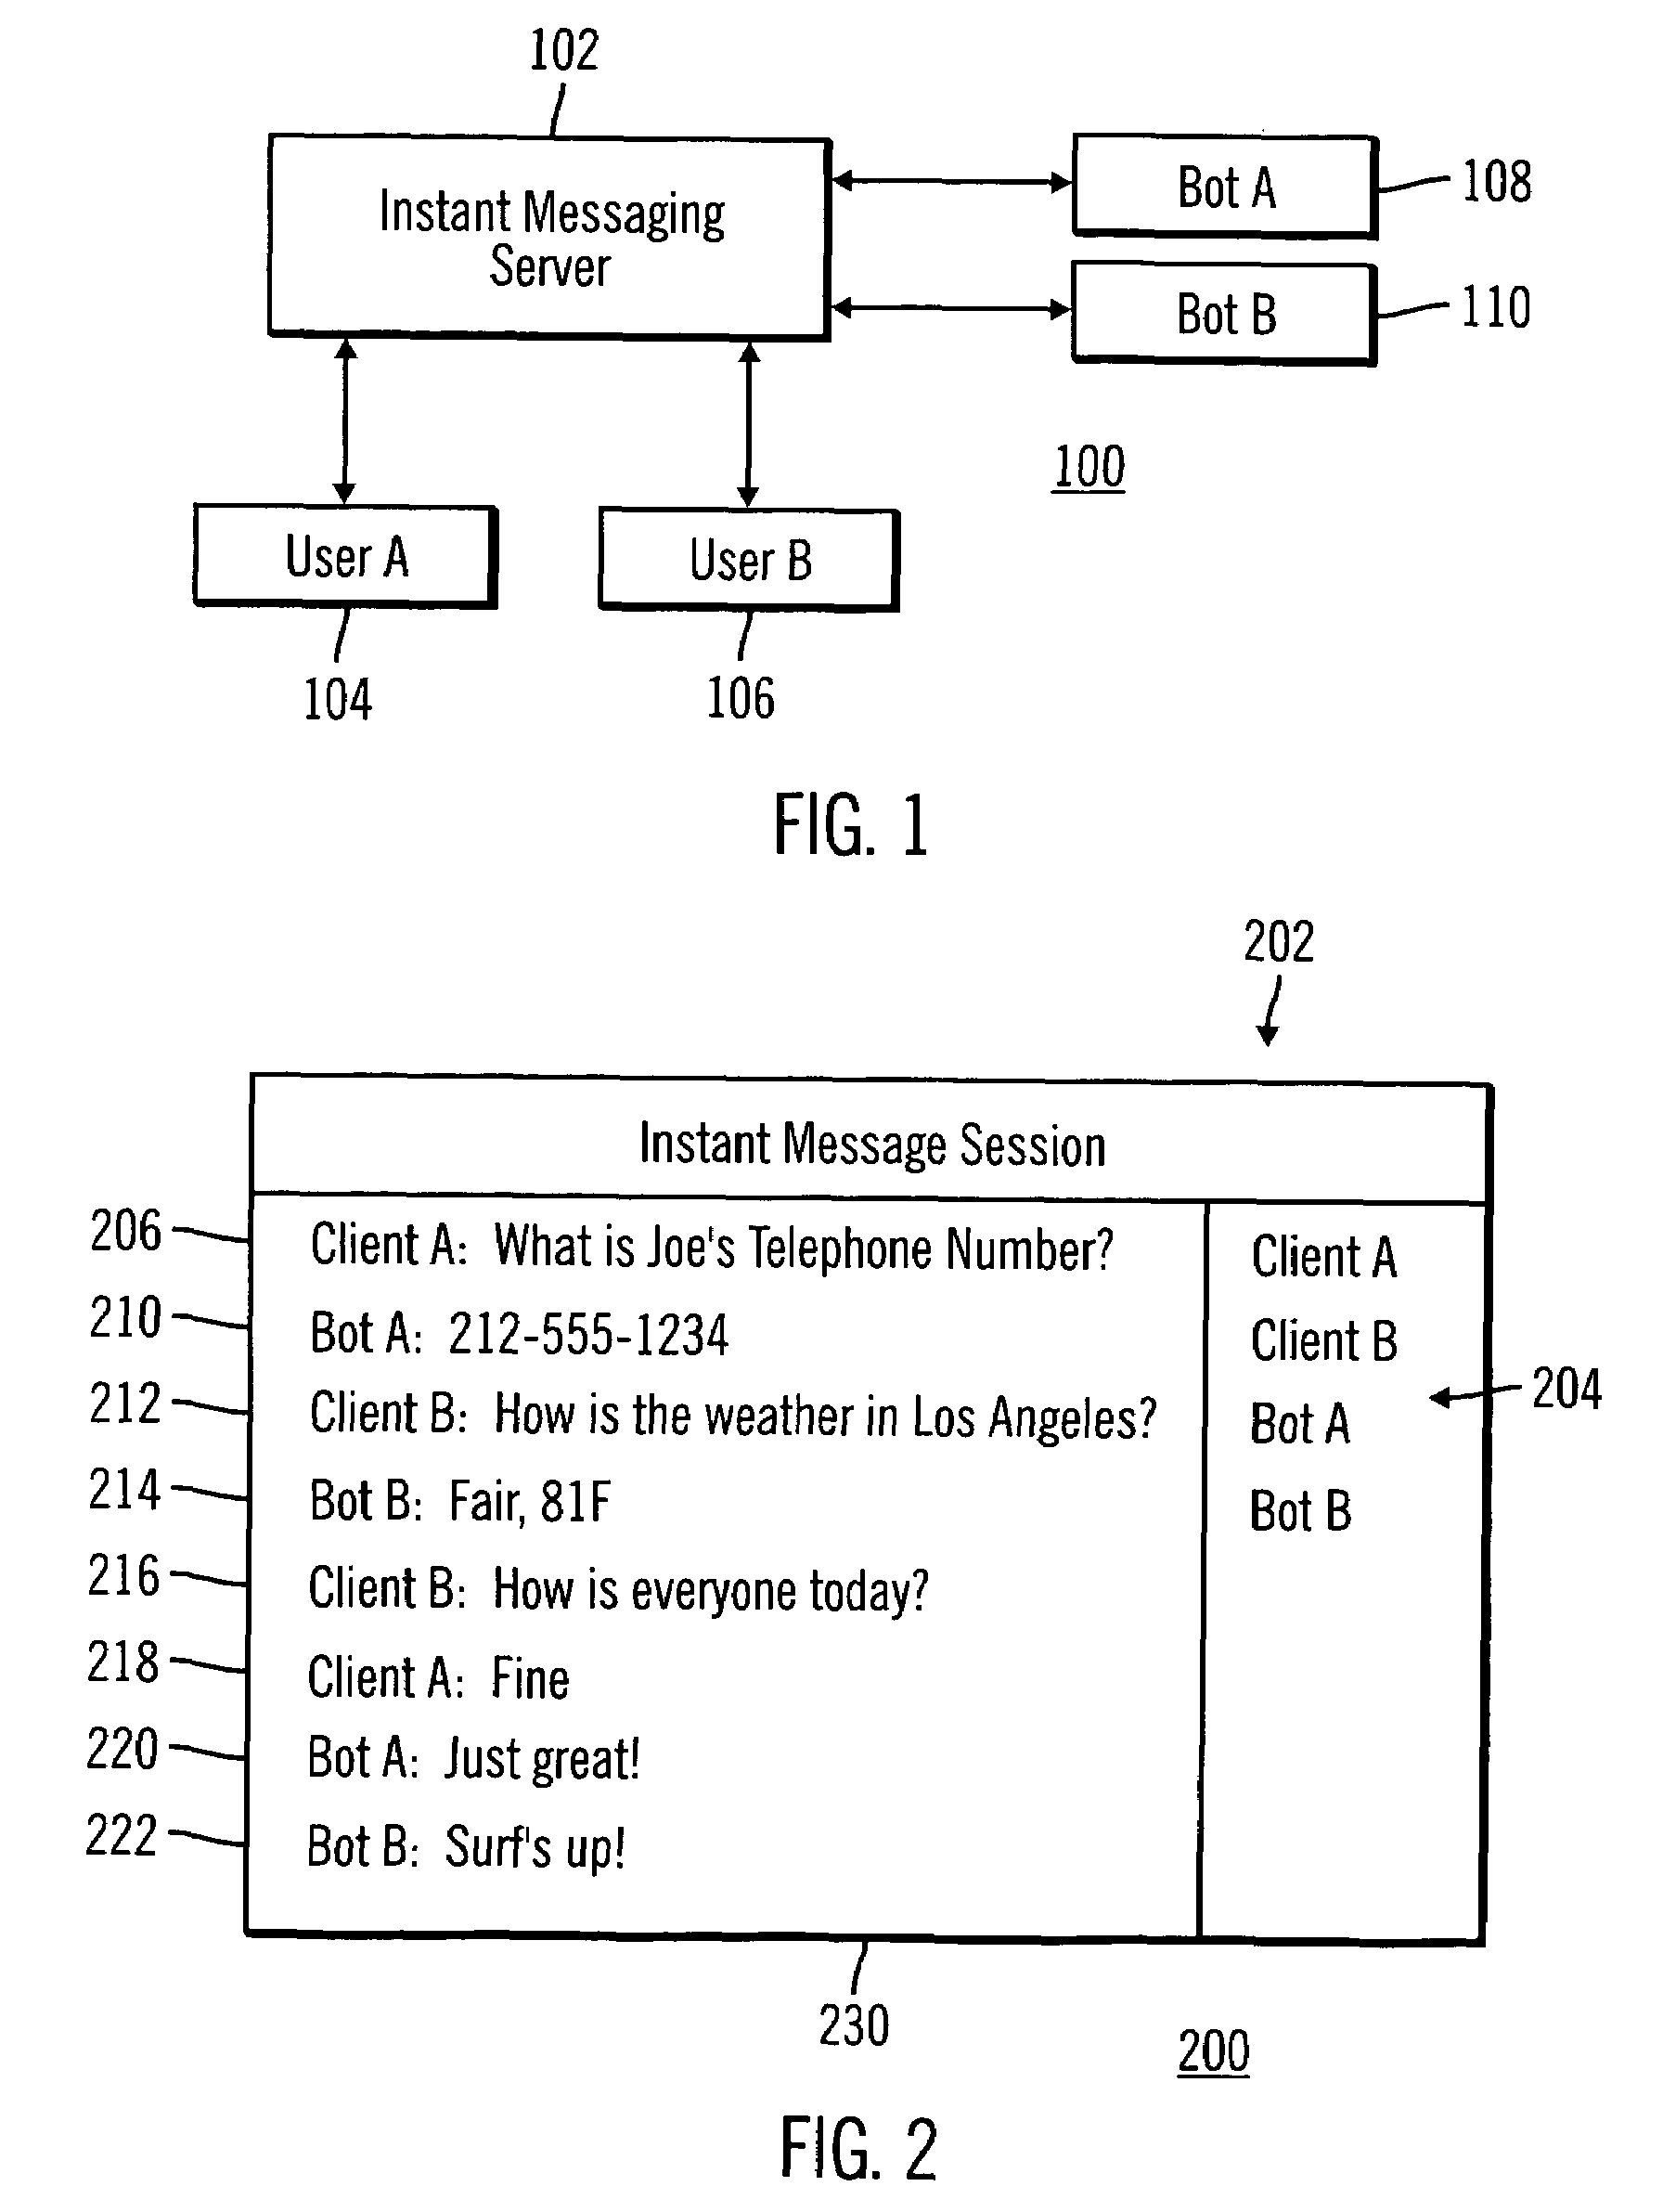 Method and system for instant messaging Bots specification using state transition methodology and XML